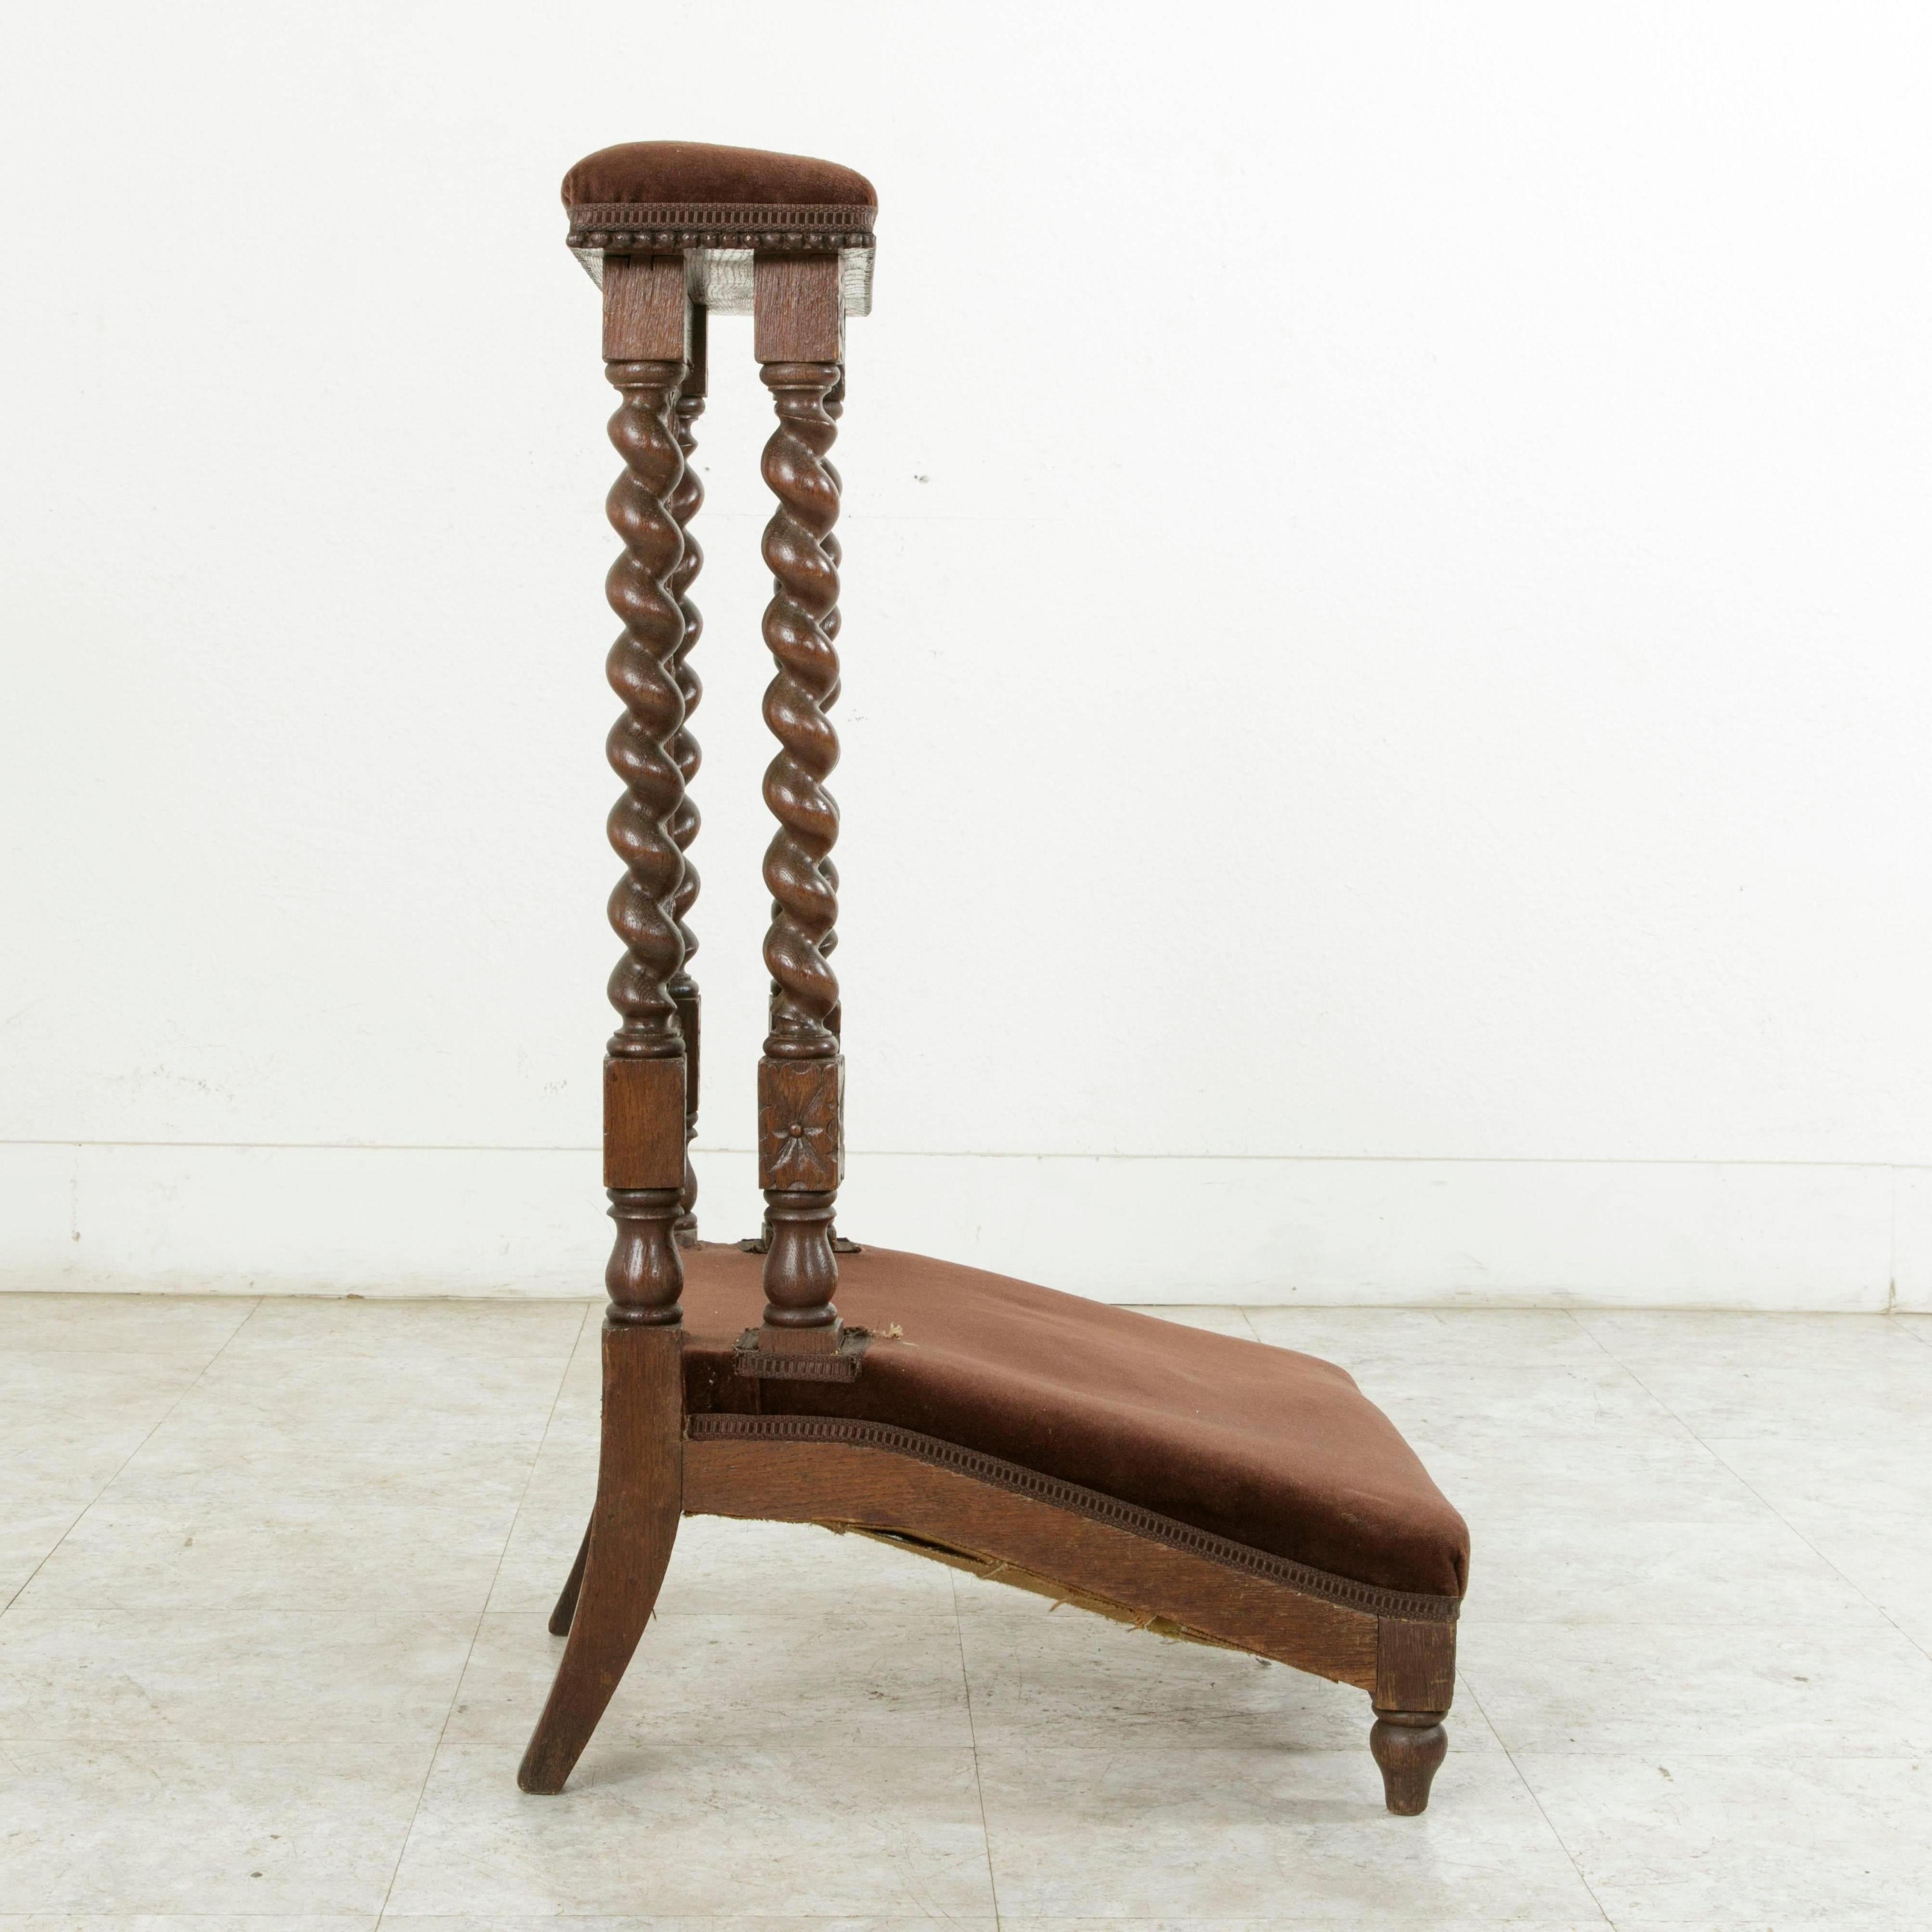 Mohair Late 19th Century French Hand-Carved Oak Prie Dieu or Prayer Chair with Columns